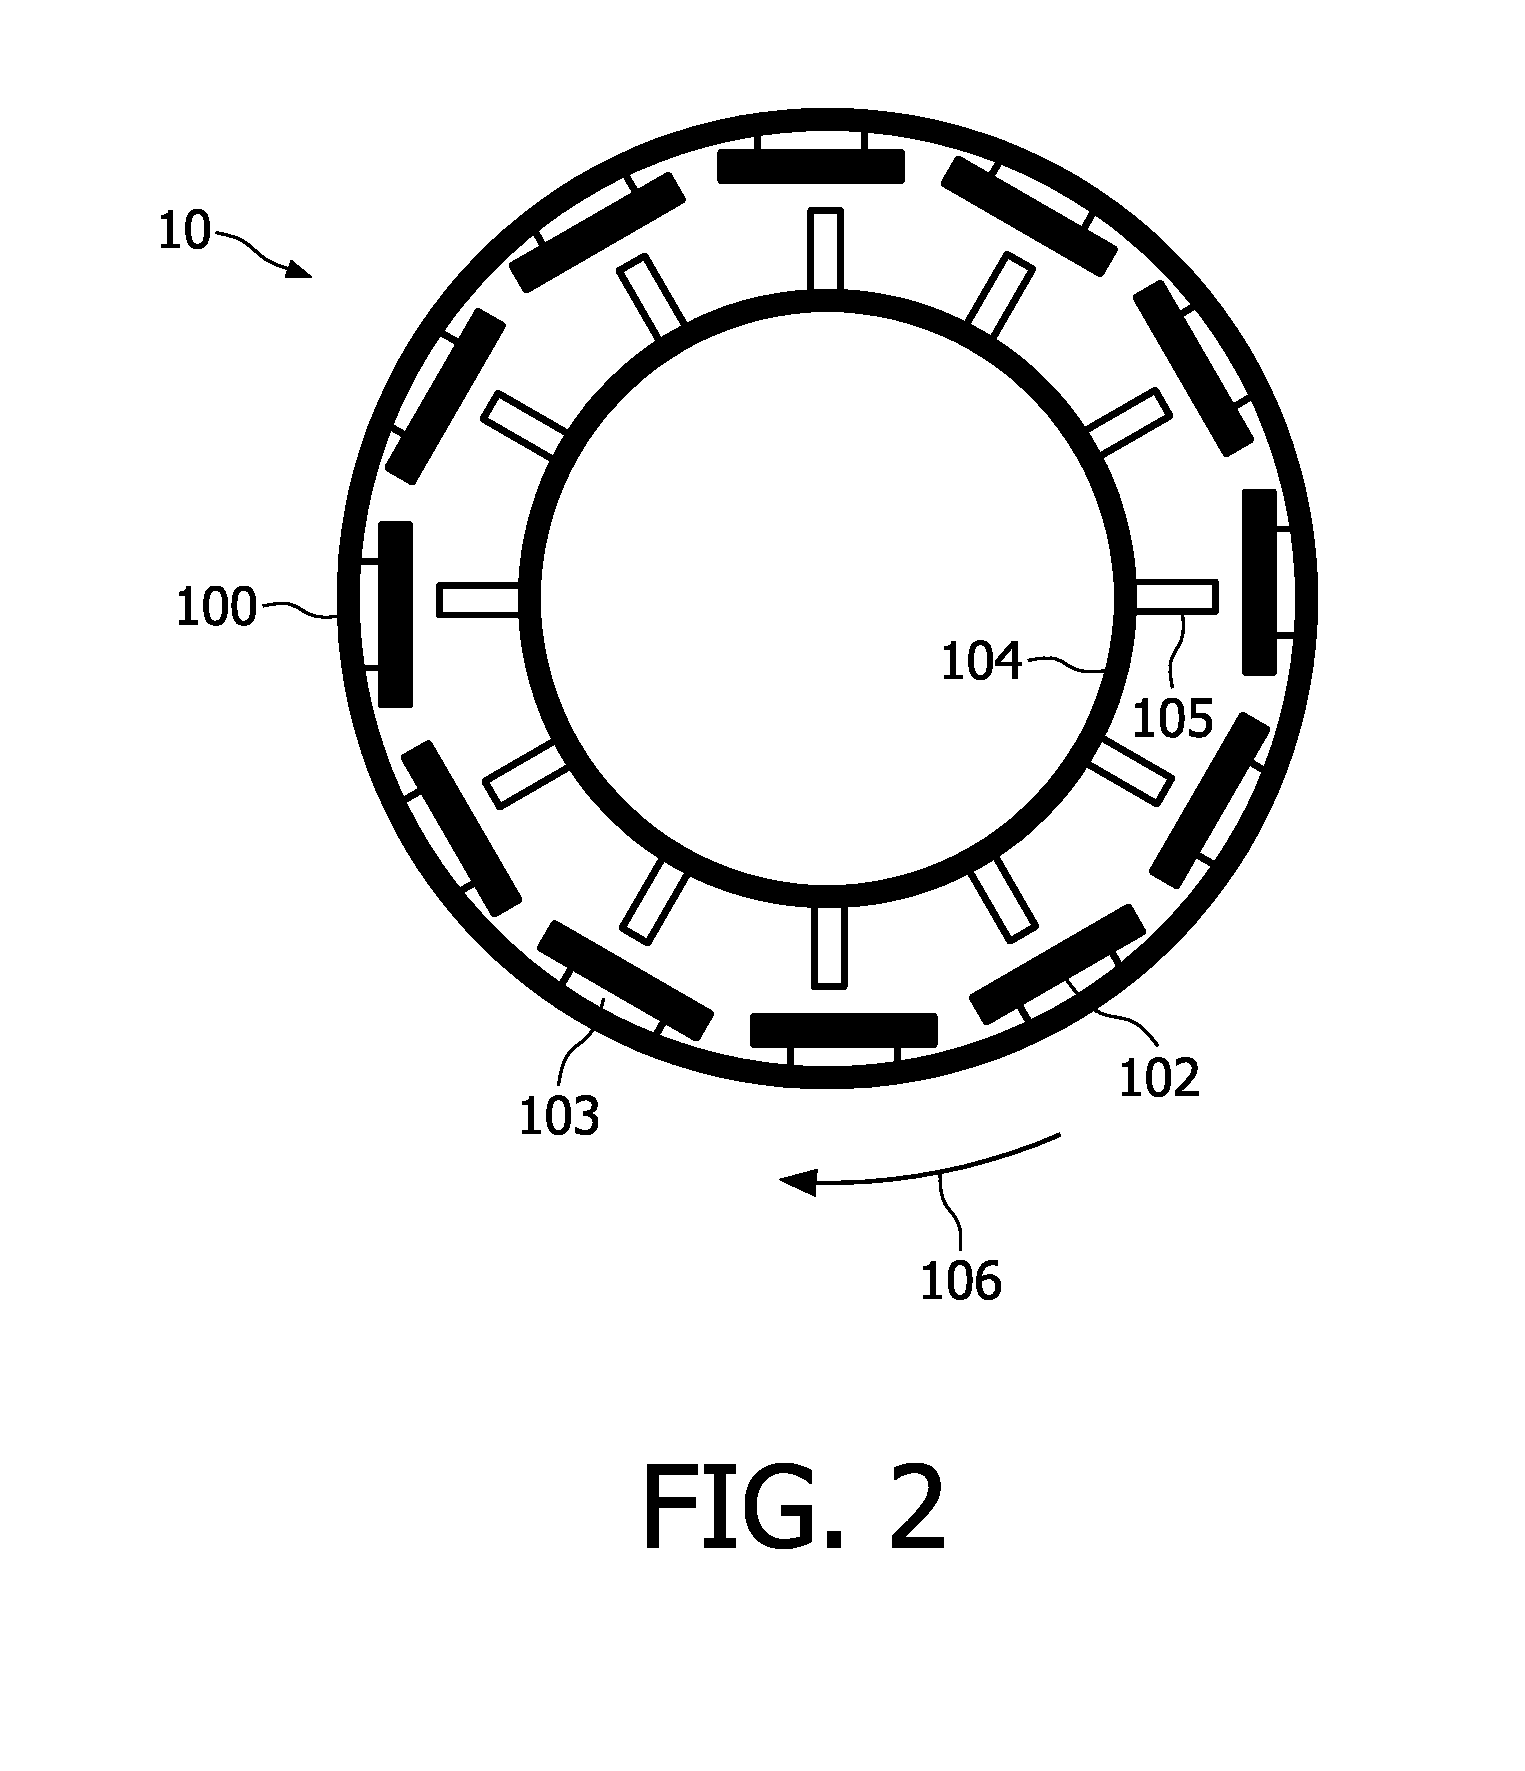 Ink-jet device and method for producing a biological assay substrate using a printing head and means for accelerated motion